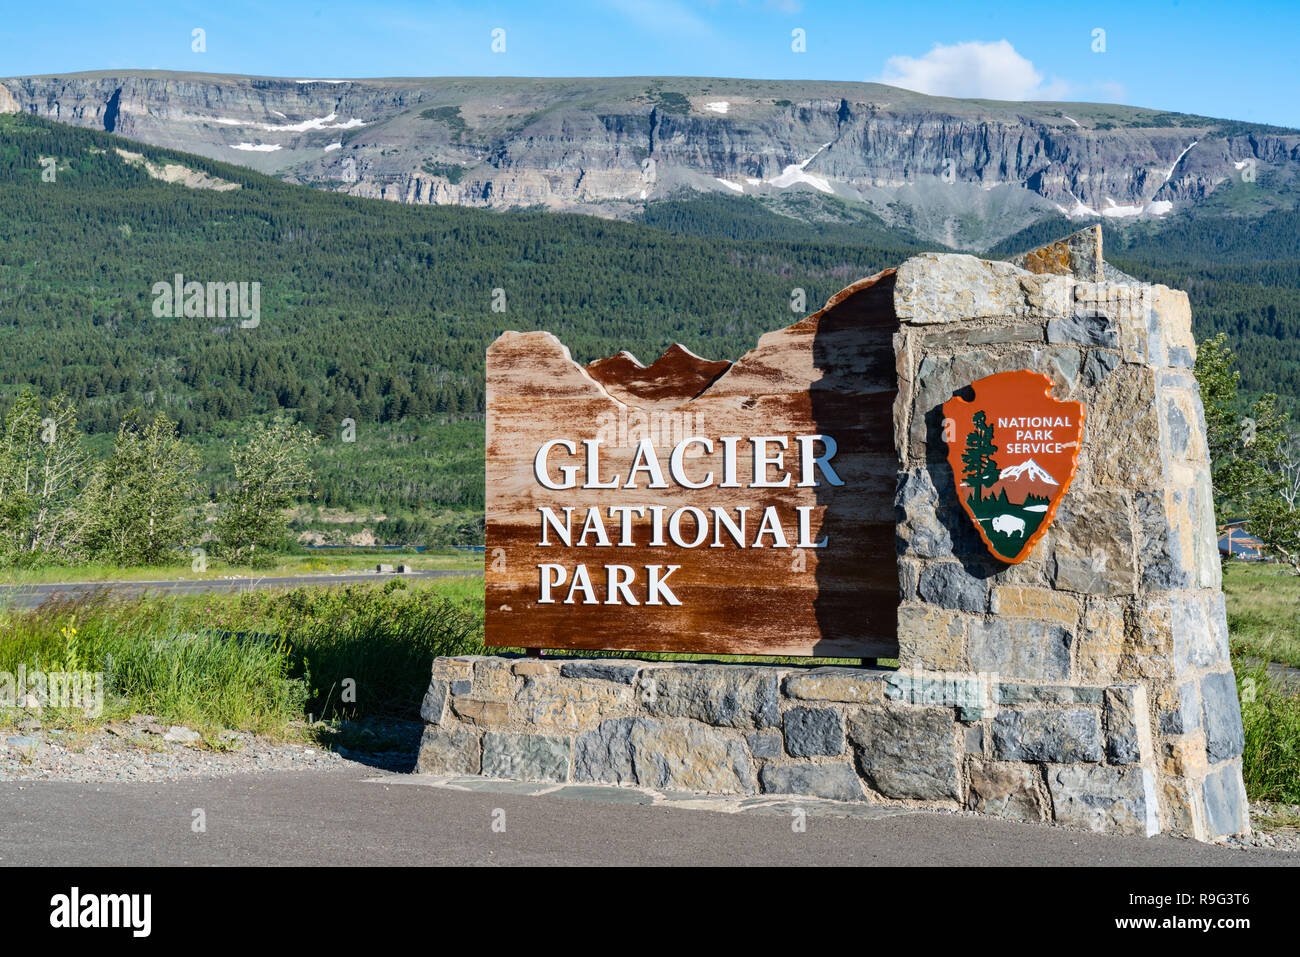 EAST GLACIER, MT - JUNE 30, 2018: Welcome sign at the entrance to Glacier National Park, Montana Stock Photo